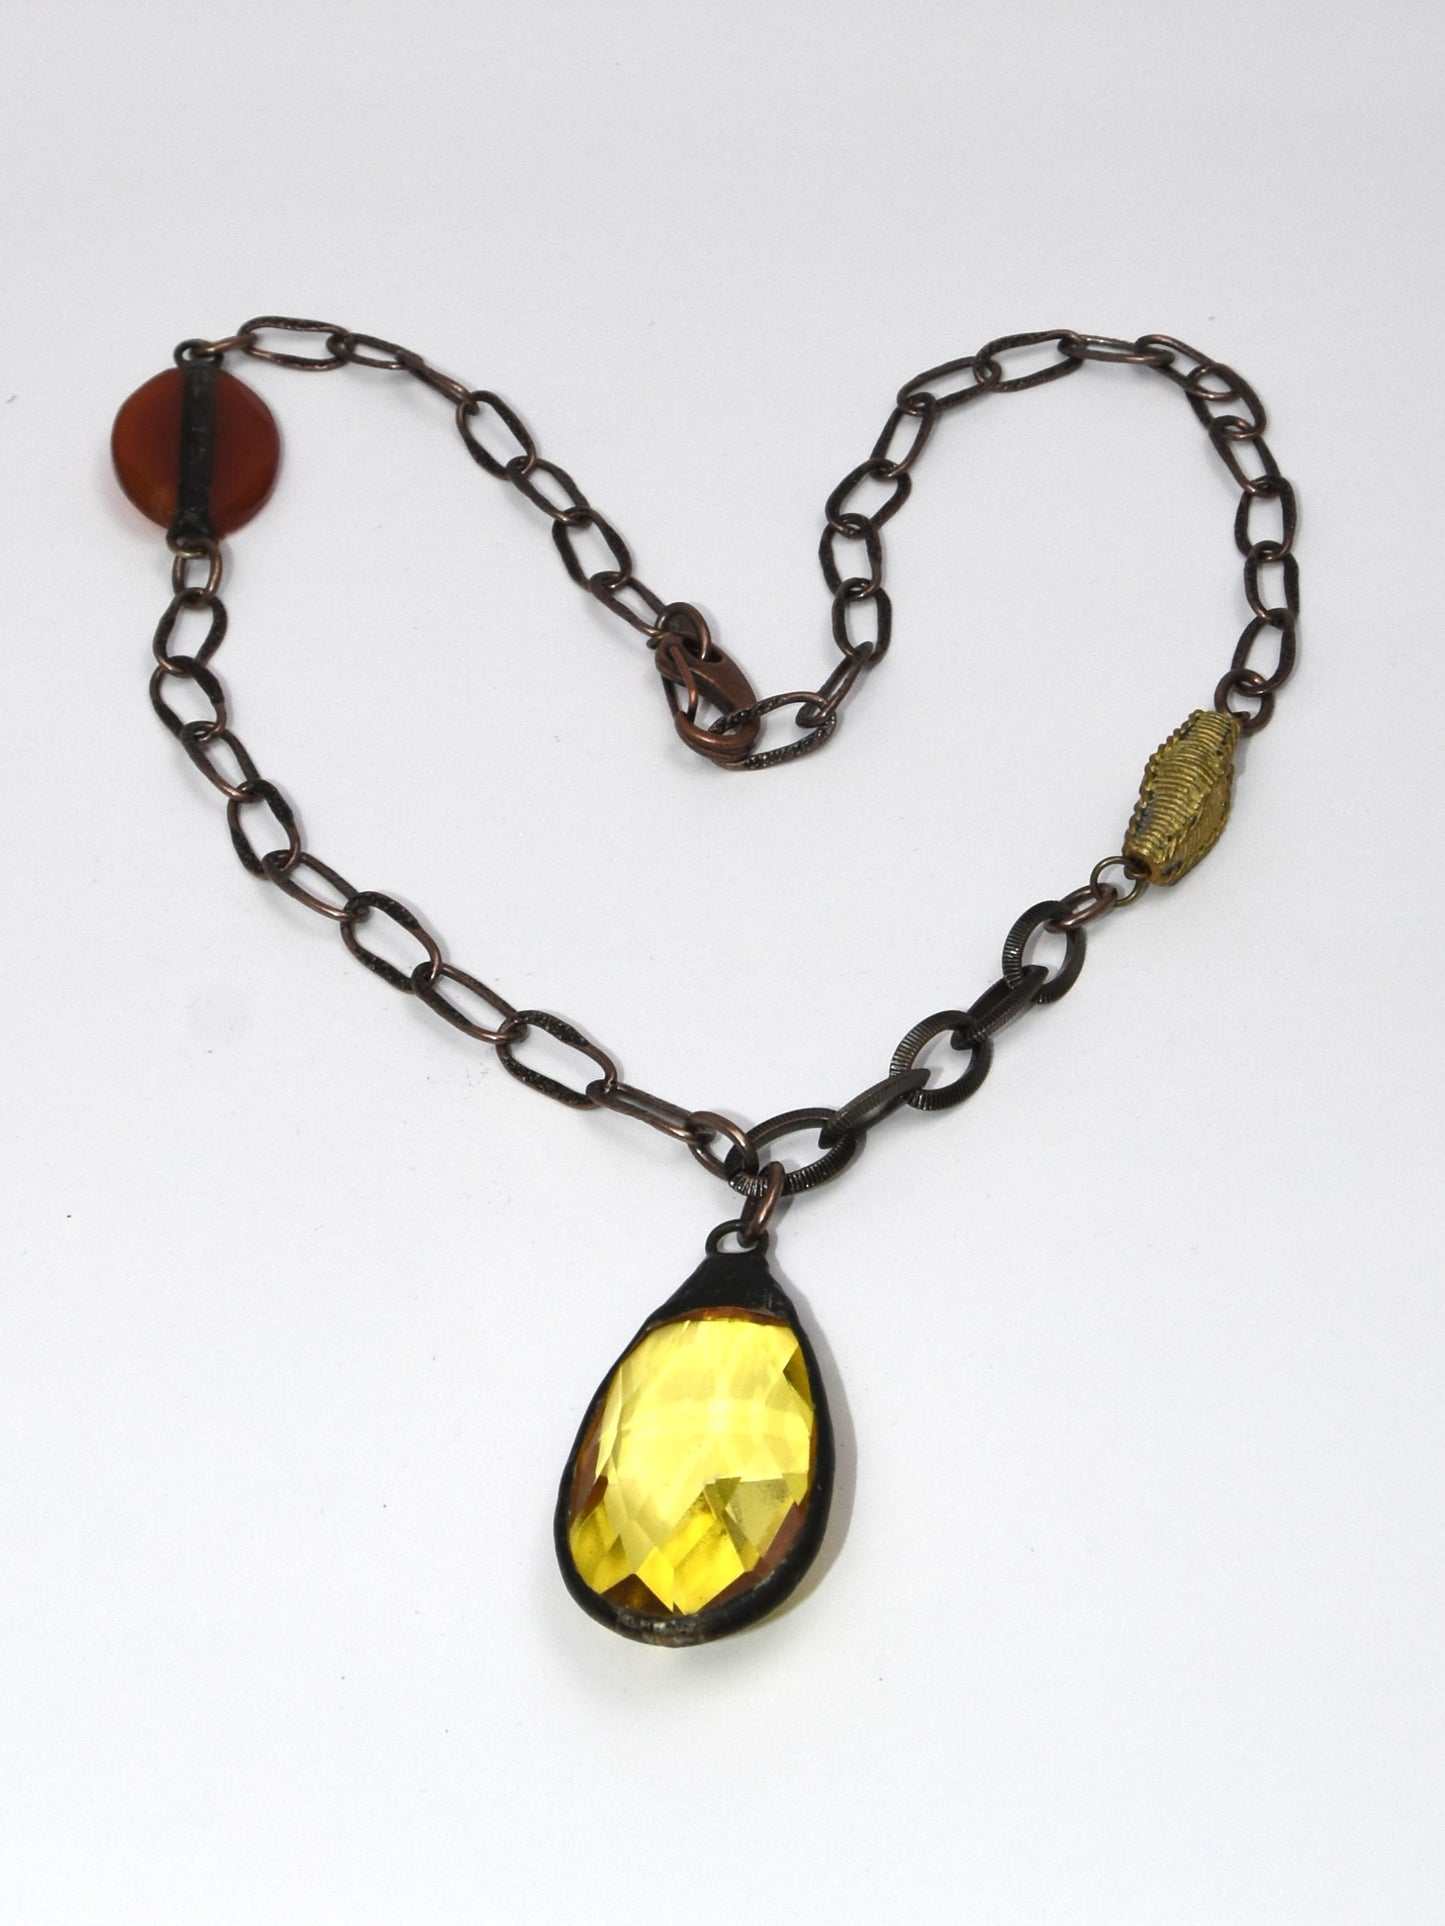 NSerena Jewelry-Crystal Pendant & Carnelian Necklace